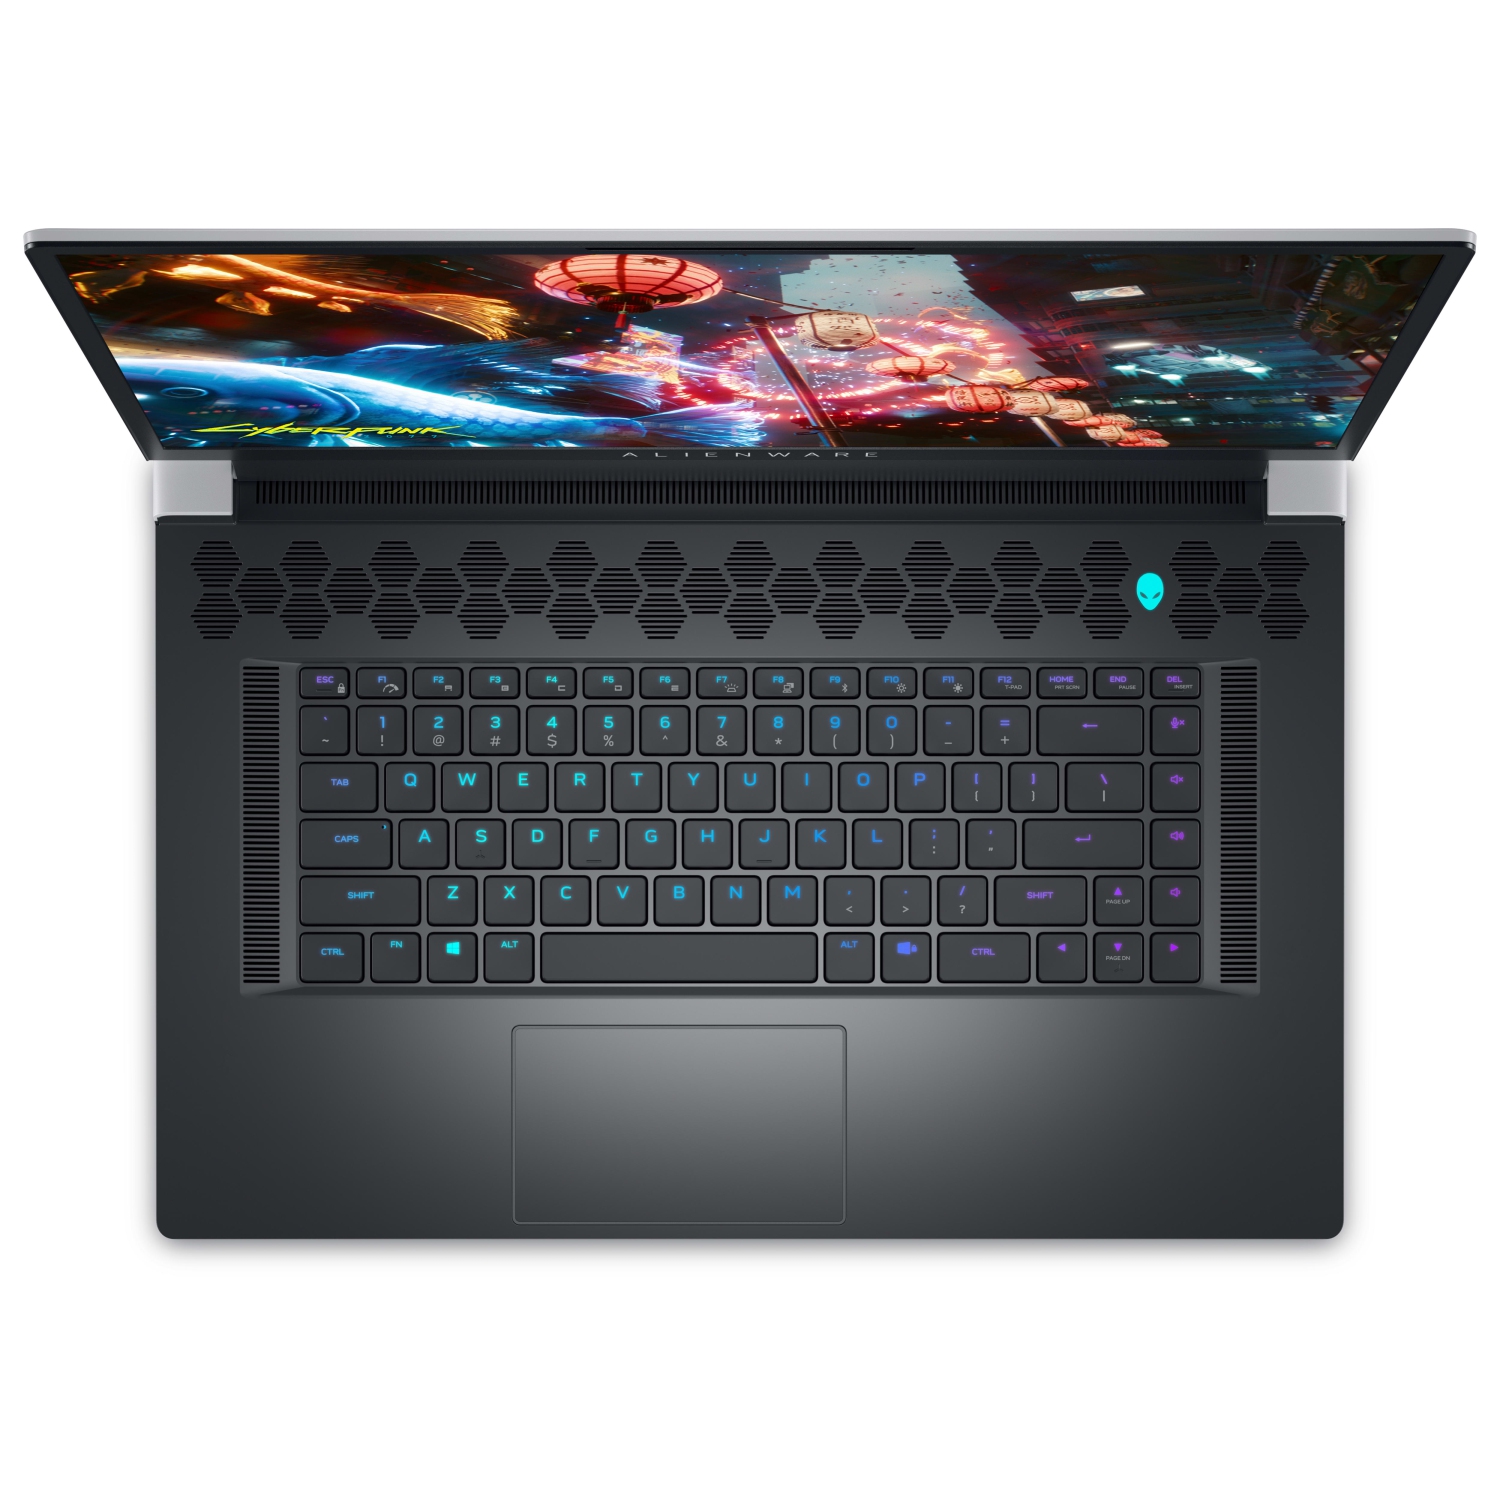 Refurbished (Excellent) – Dell Alienware X17 R2 Gaming Laptop (2022) | 17.3" FHD | Core i7 - 2TB SSD - 16GB RAM - RTX 3060 | 14 Cores @ 4.7 GHz - 12th Gen CPU - 12GB GDDR6